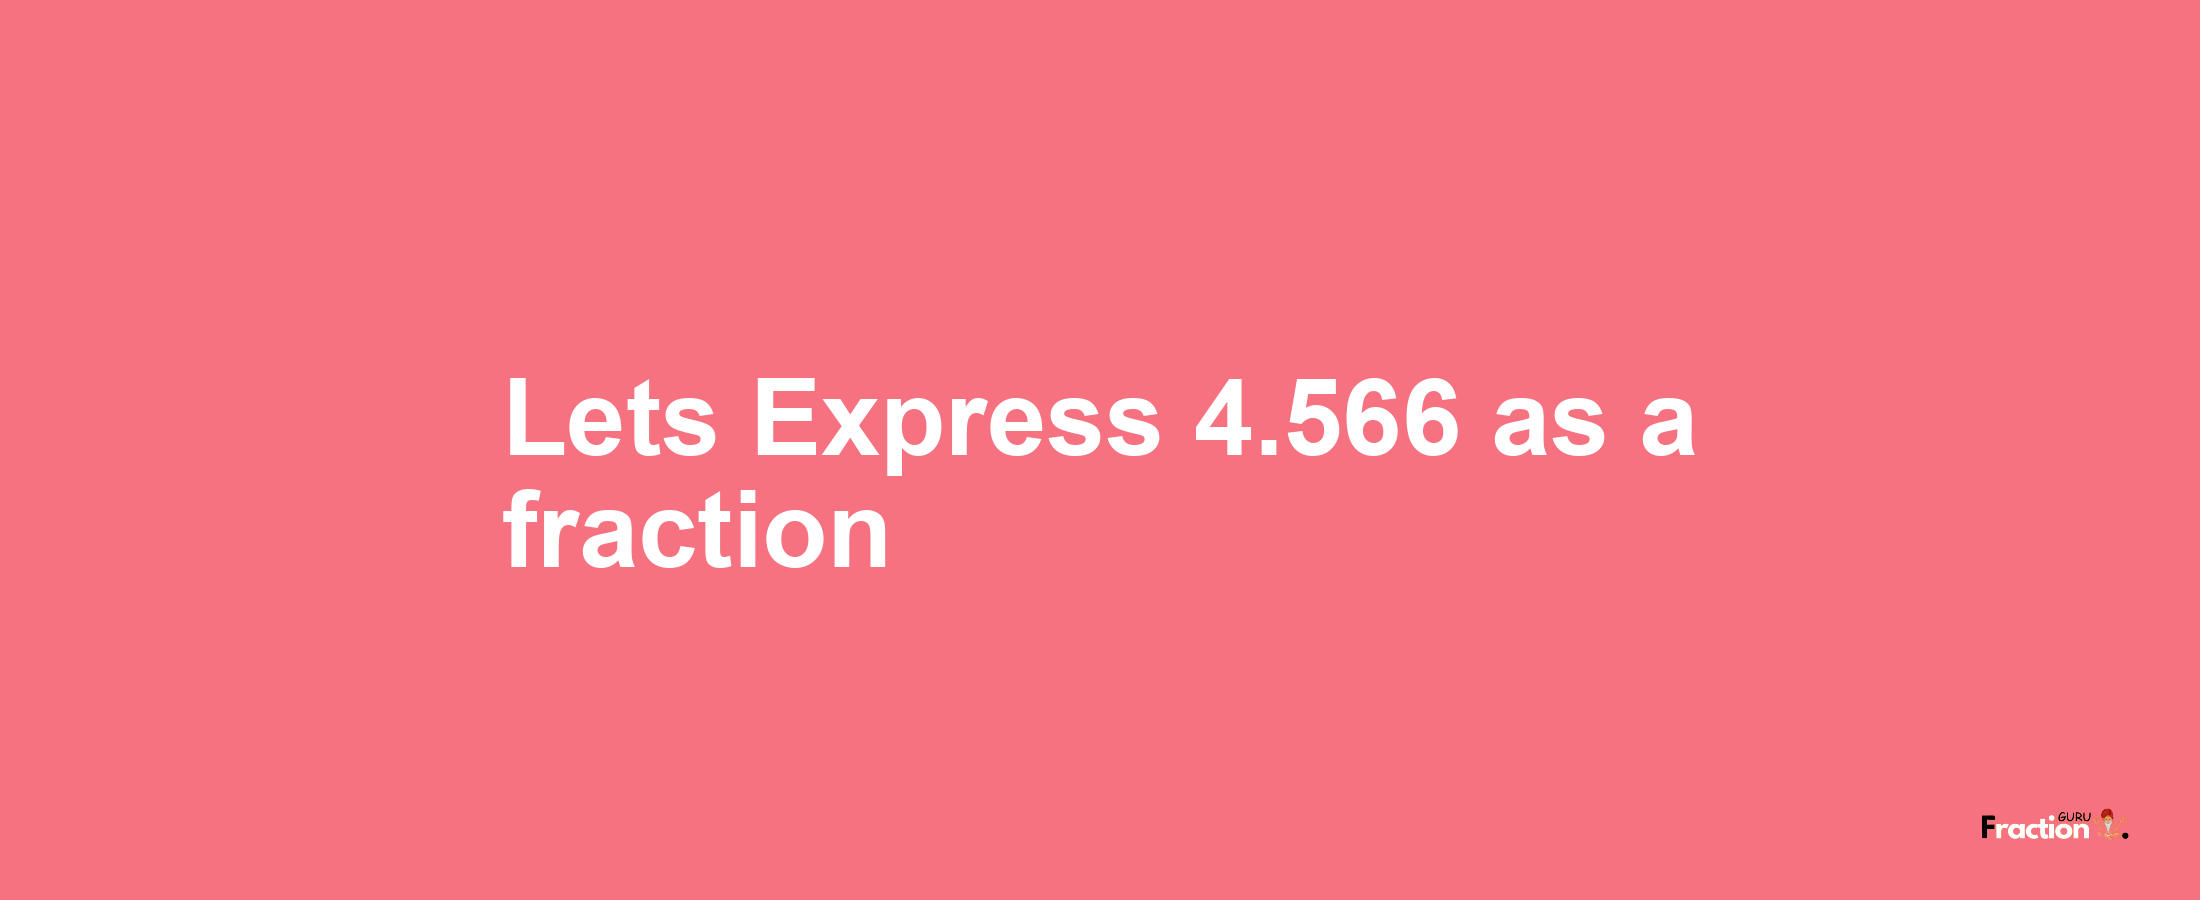 Lets Express 4.566 as afraction